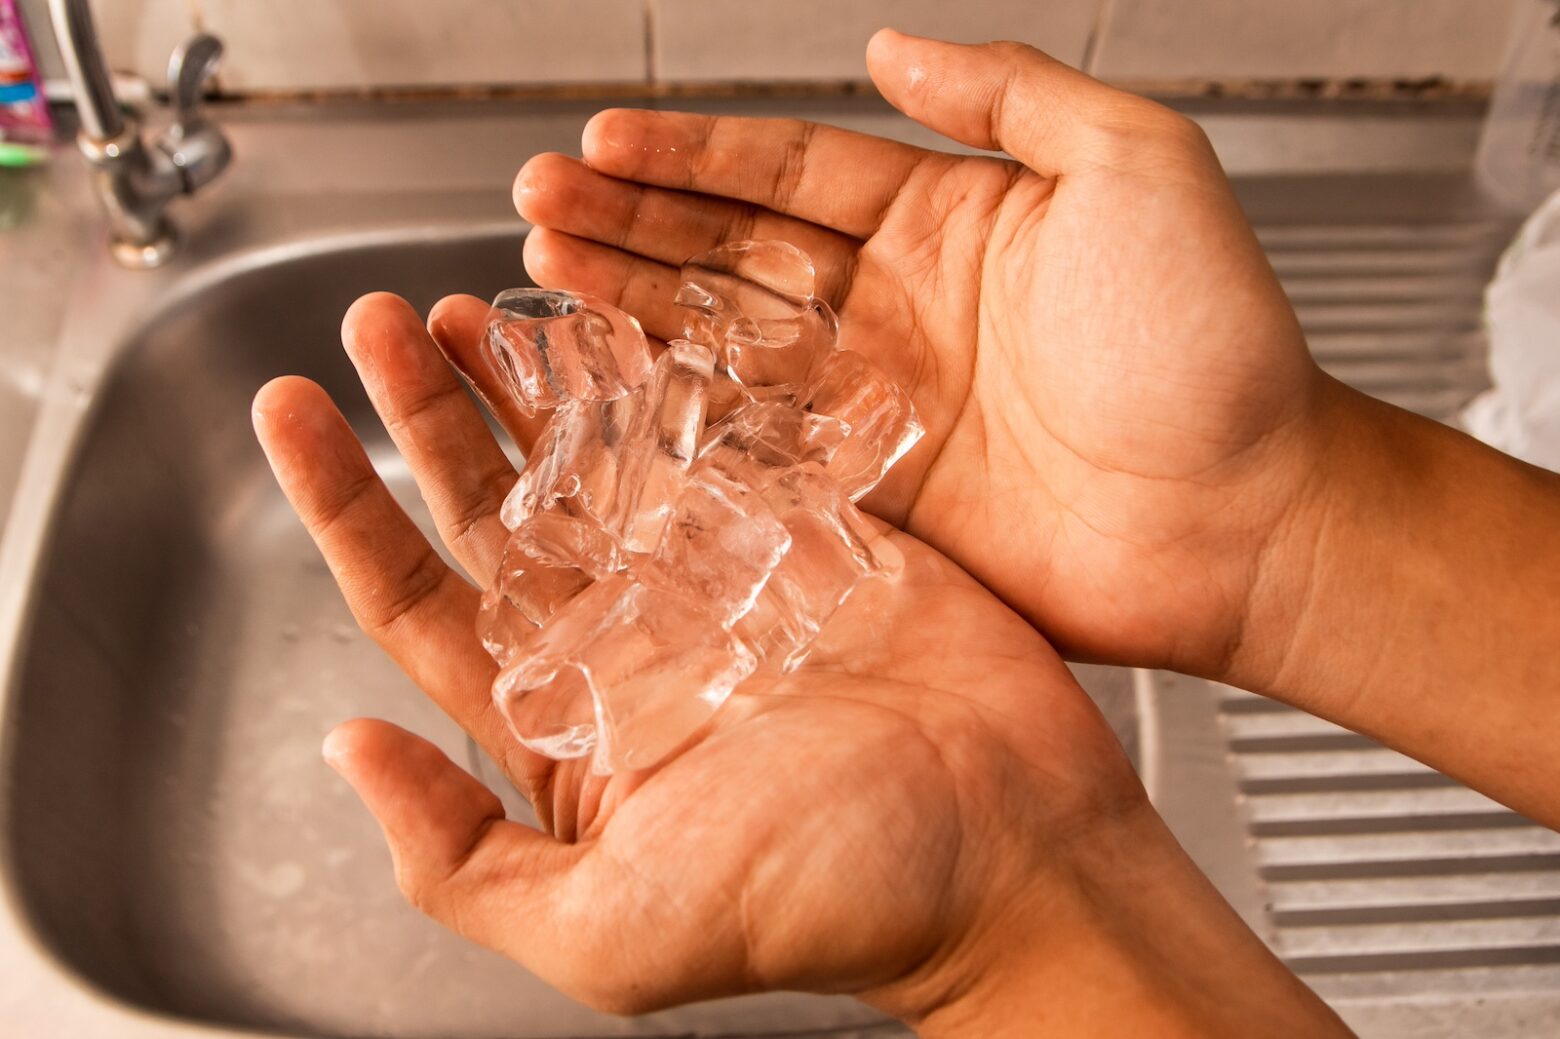 person holding ice in hands over the sink